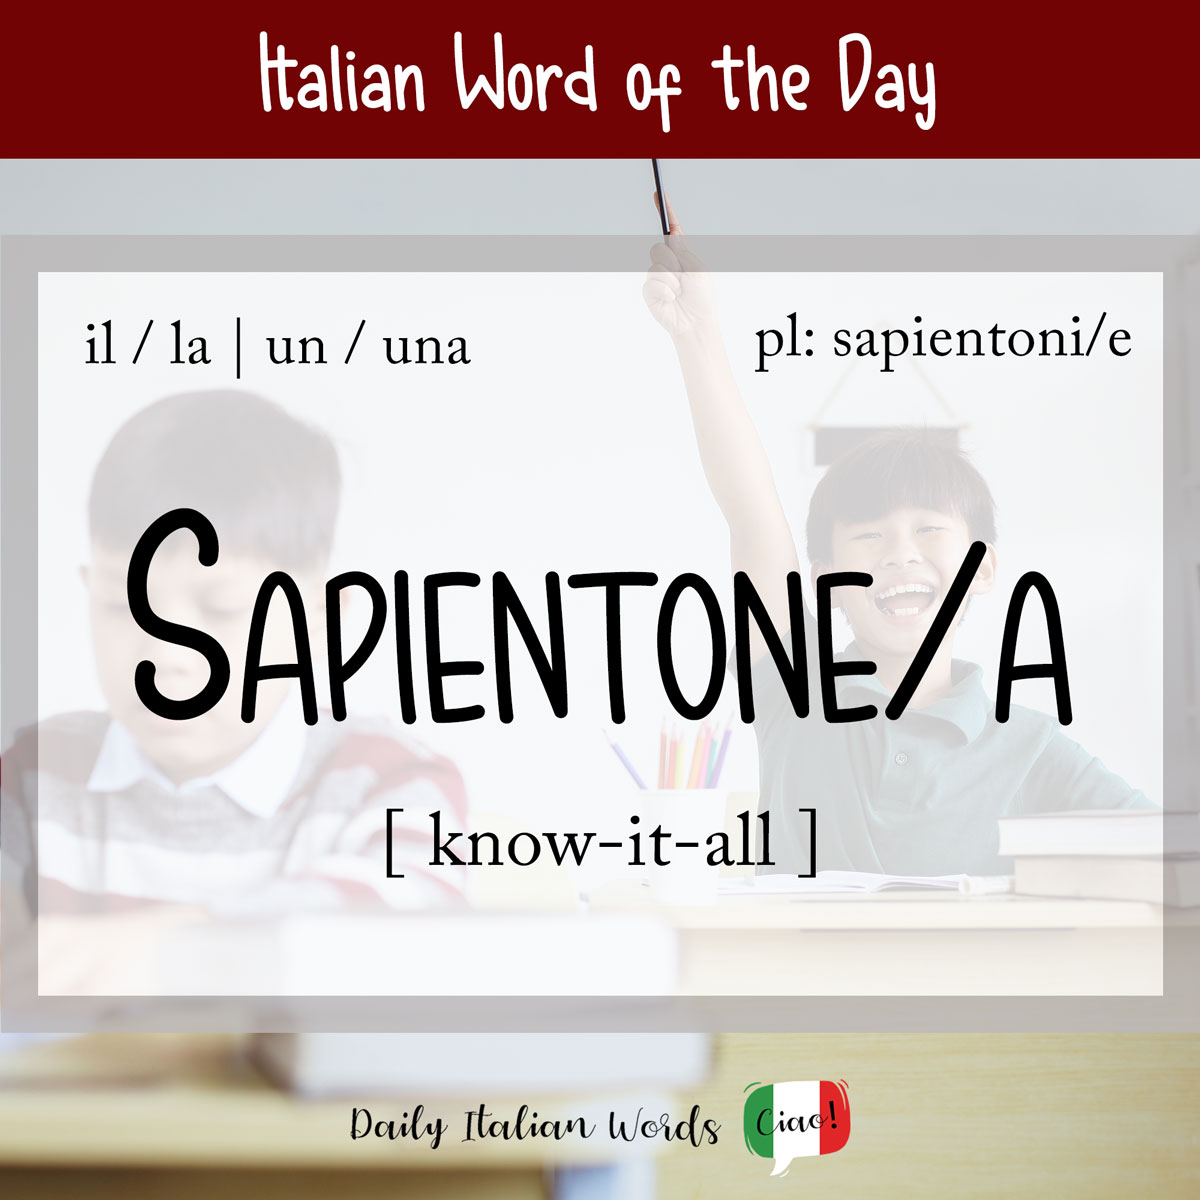 Italian Word of the Day: Sapientone/a (Know it all)